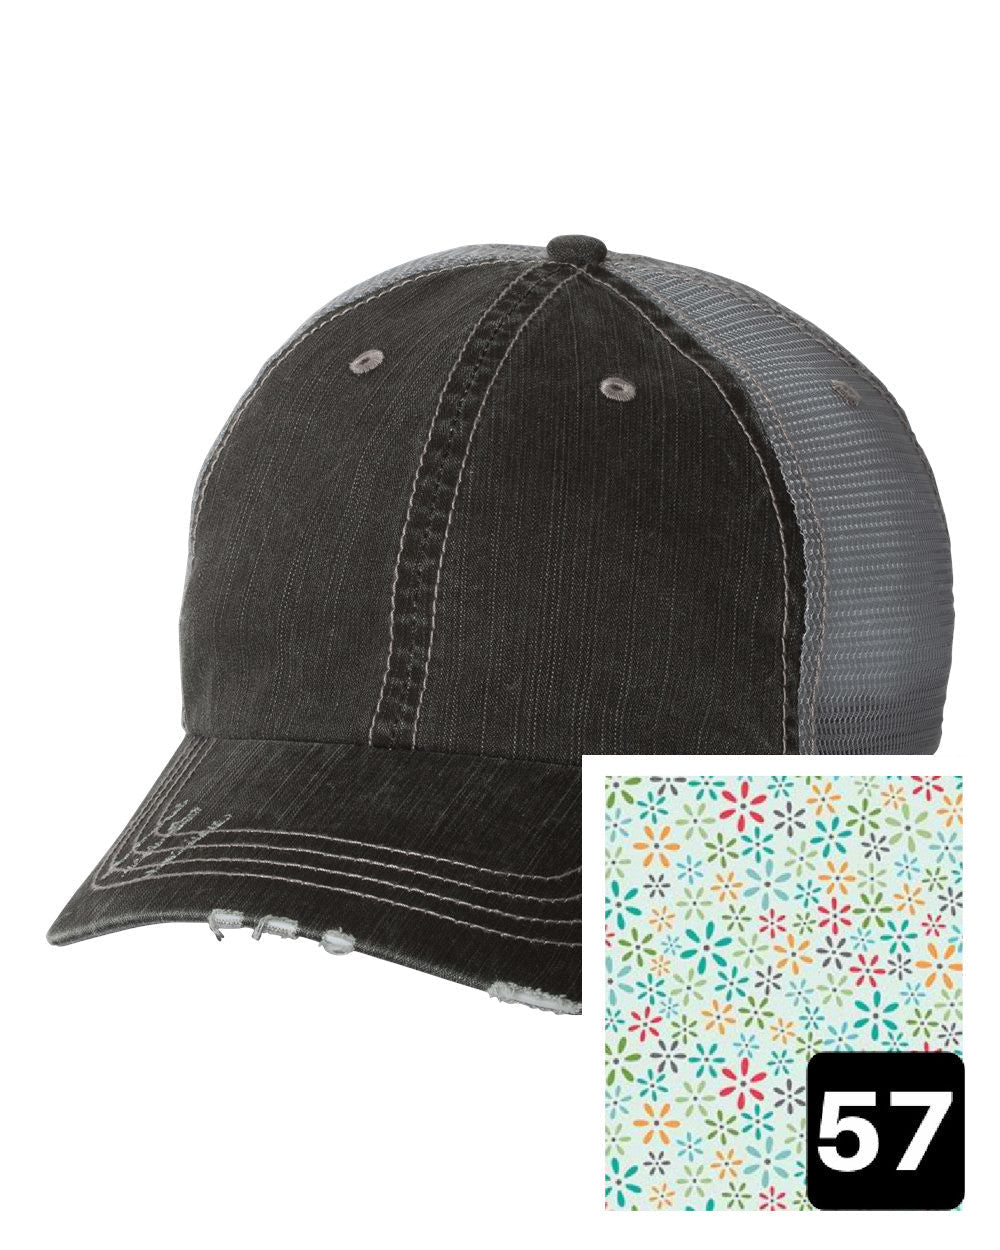 gray distressed trucker hat with white daisy on yellow fabric state of Montana